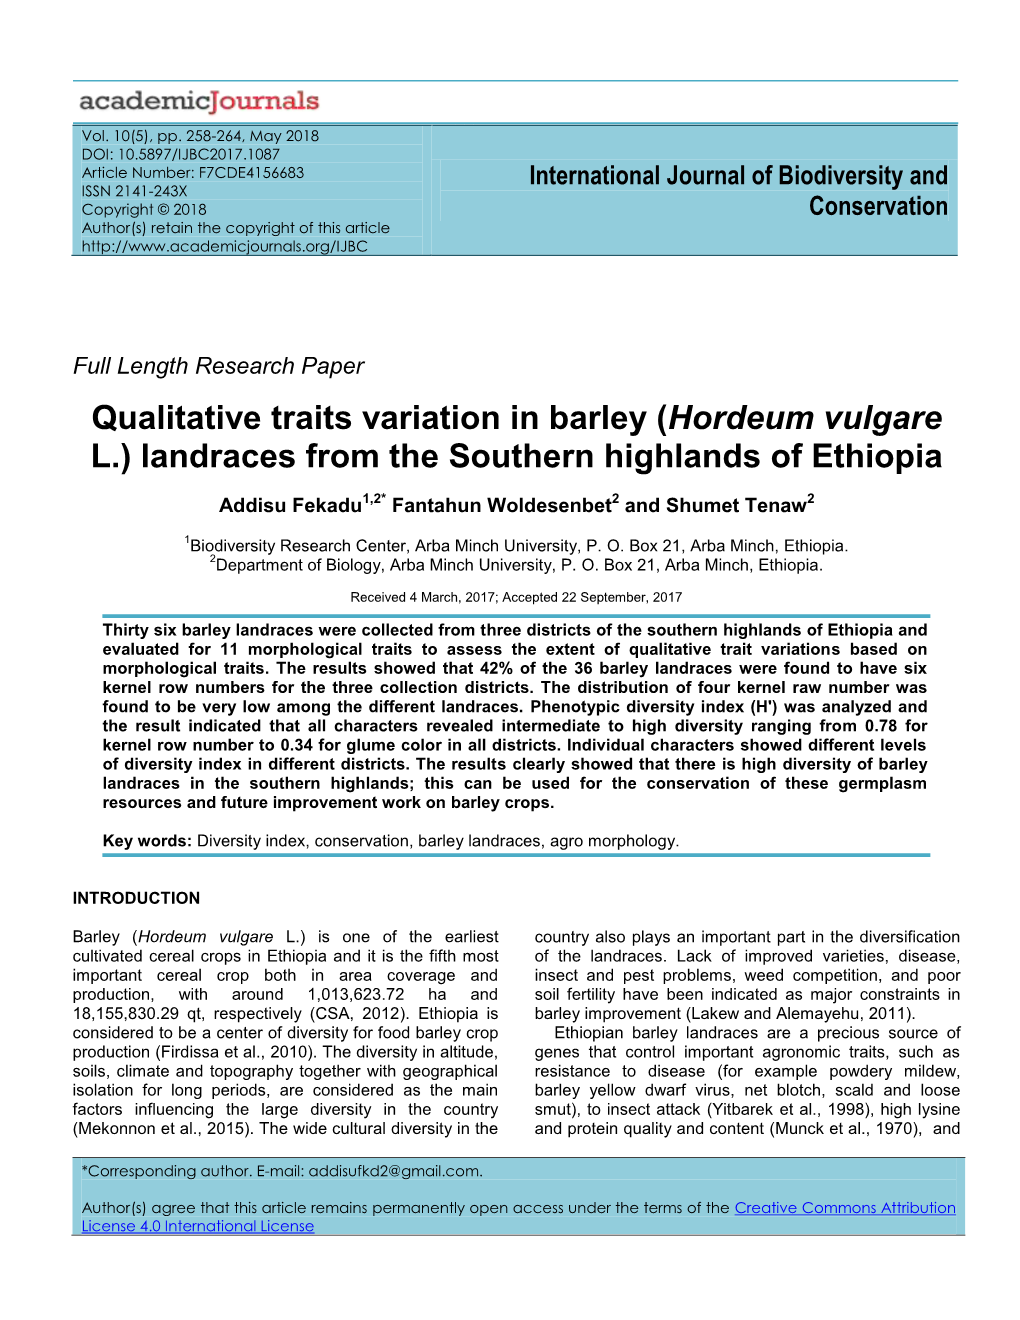 Qualitative Traits Variation in Barley (Hordeum Vulgare L.) Landraces from the Southern Highlands of Ethiopia